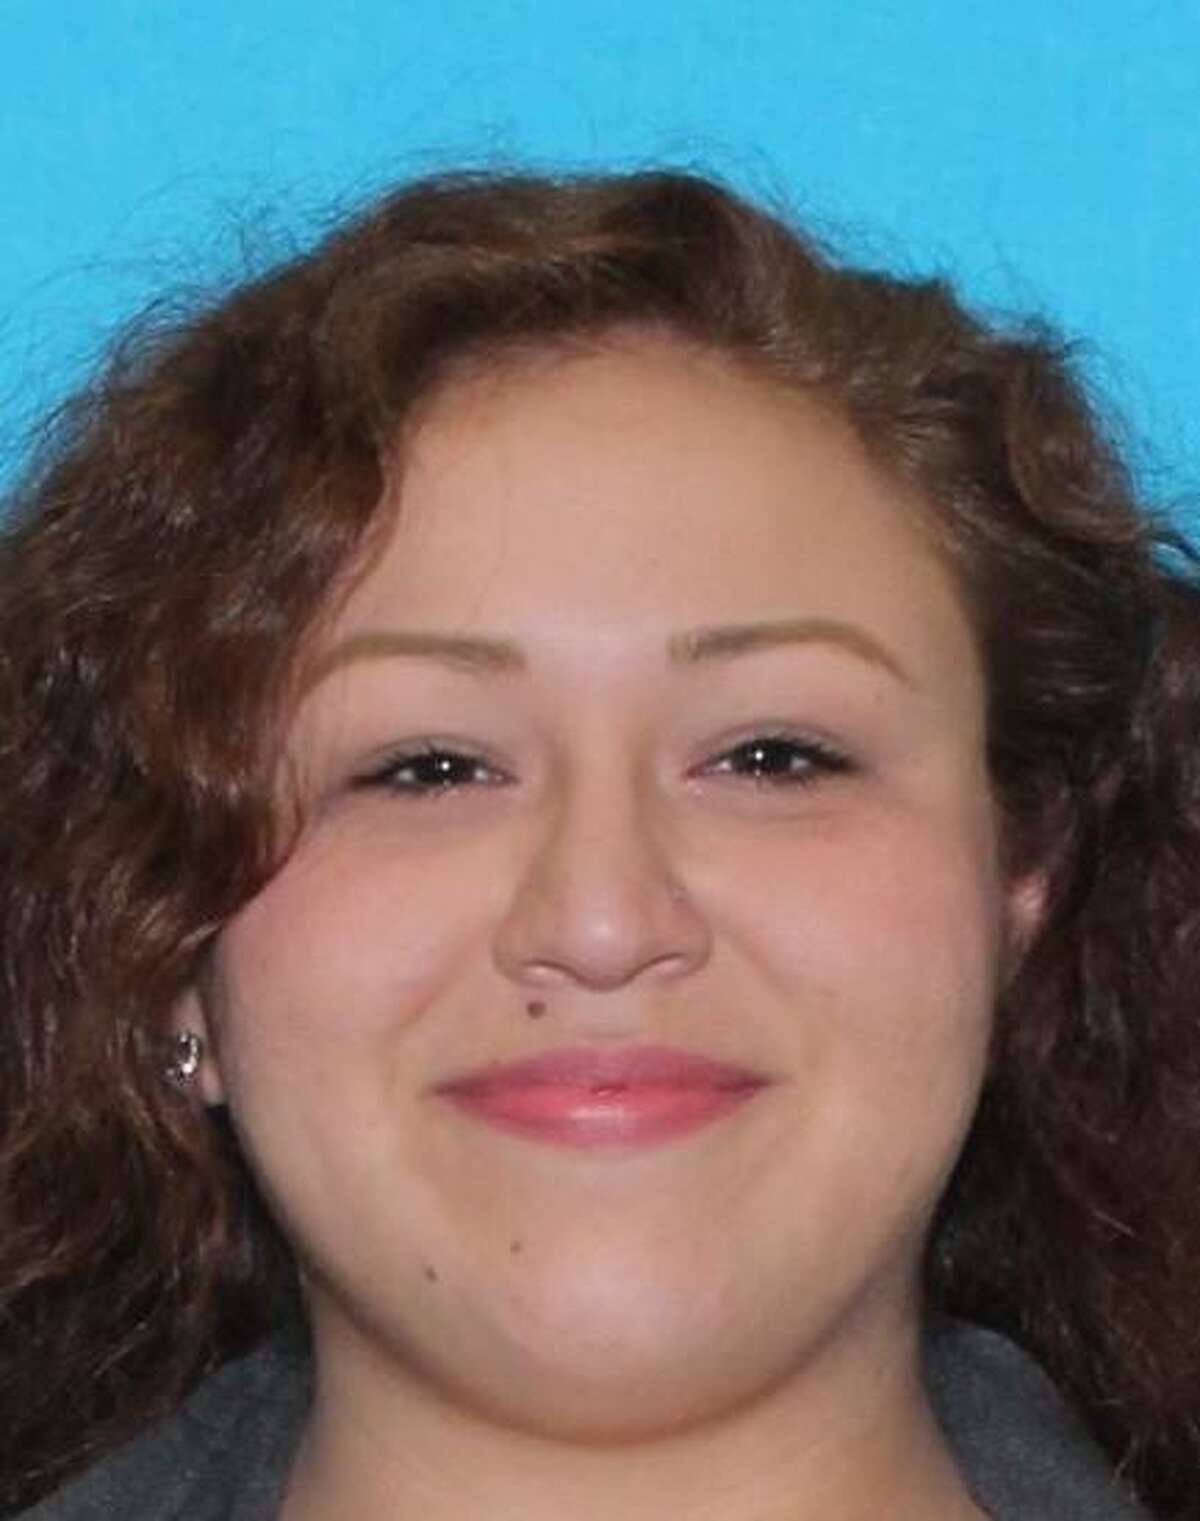 Candida Jimenez, 22, was fatally shot on March 22 during a robbery at an apartment complex in the 5900 block of Danny Kaye Drive.